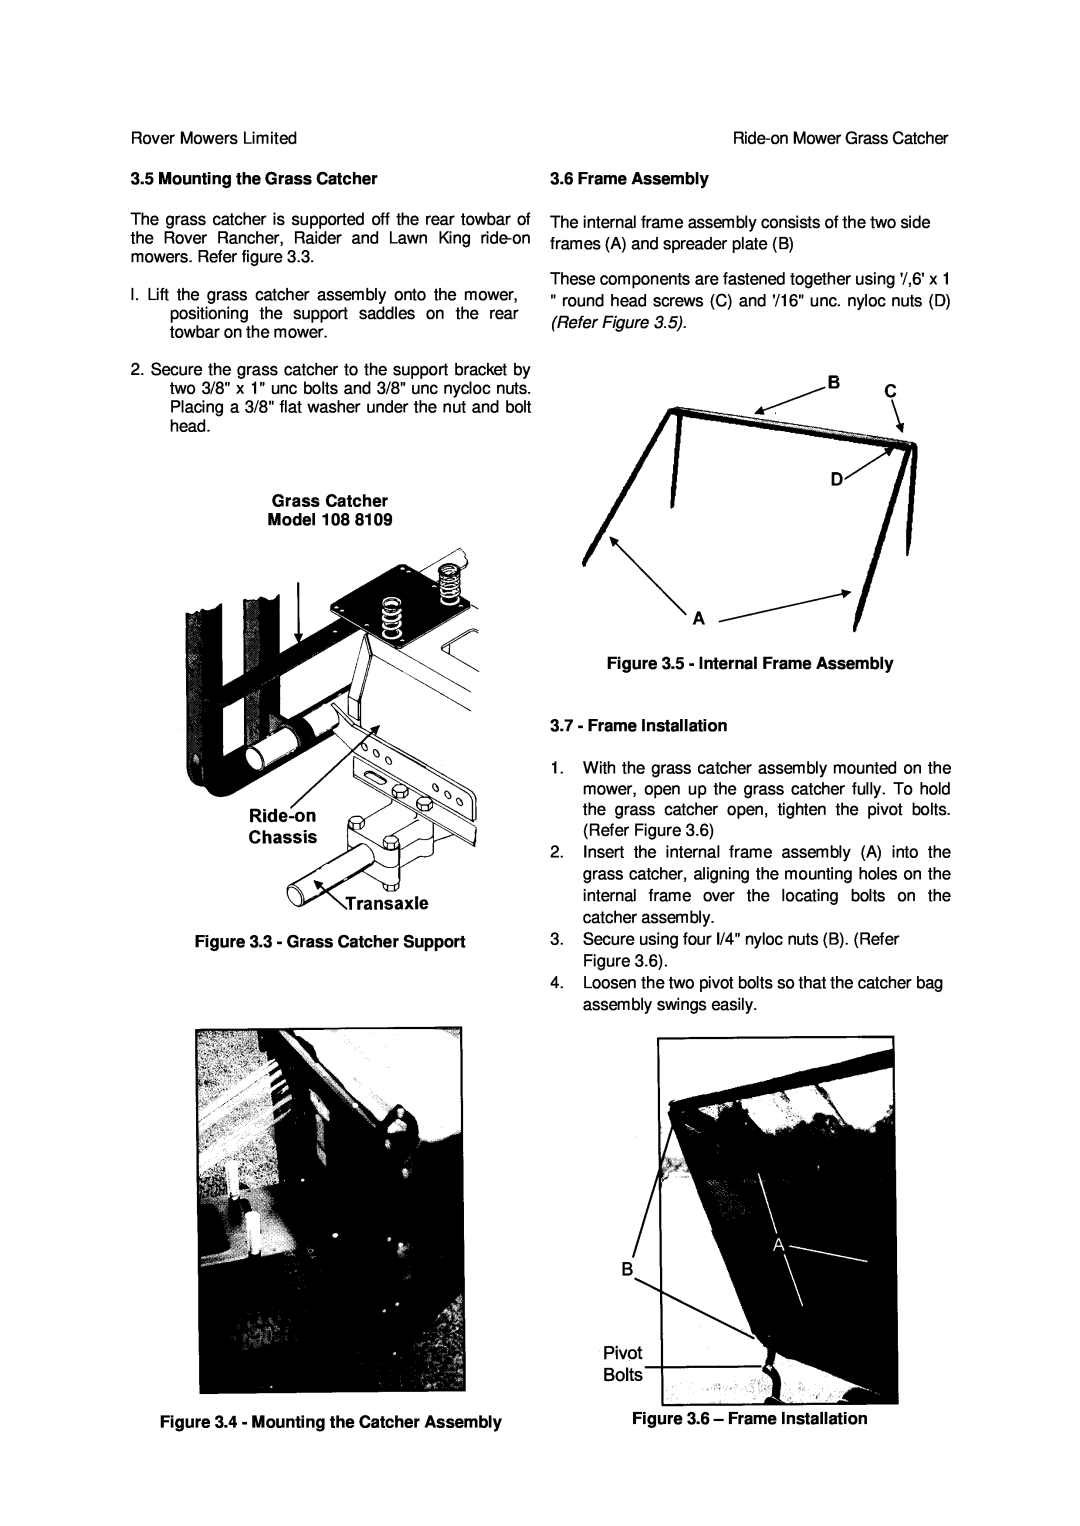 Rover 108, 109 owner manual Mounting the Grass Catcher, Grass Catcher Model, 3 - Grass Catcher Support, Frame Assembly 